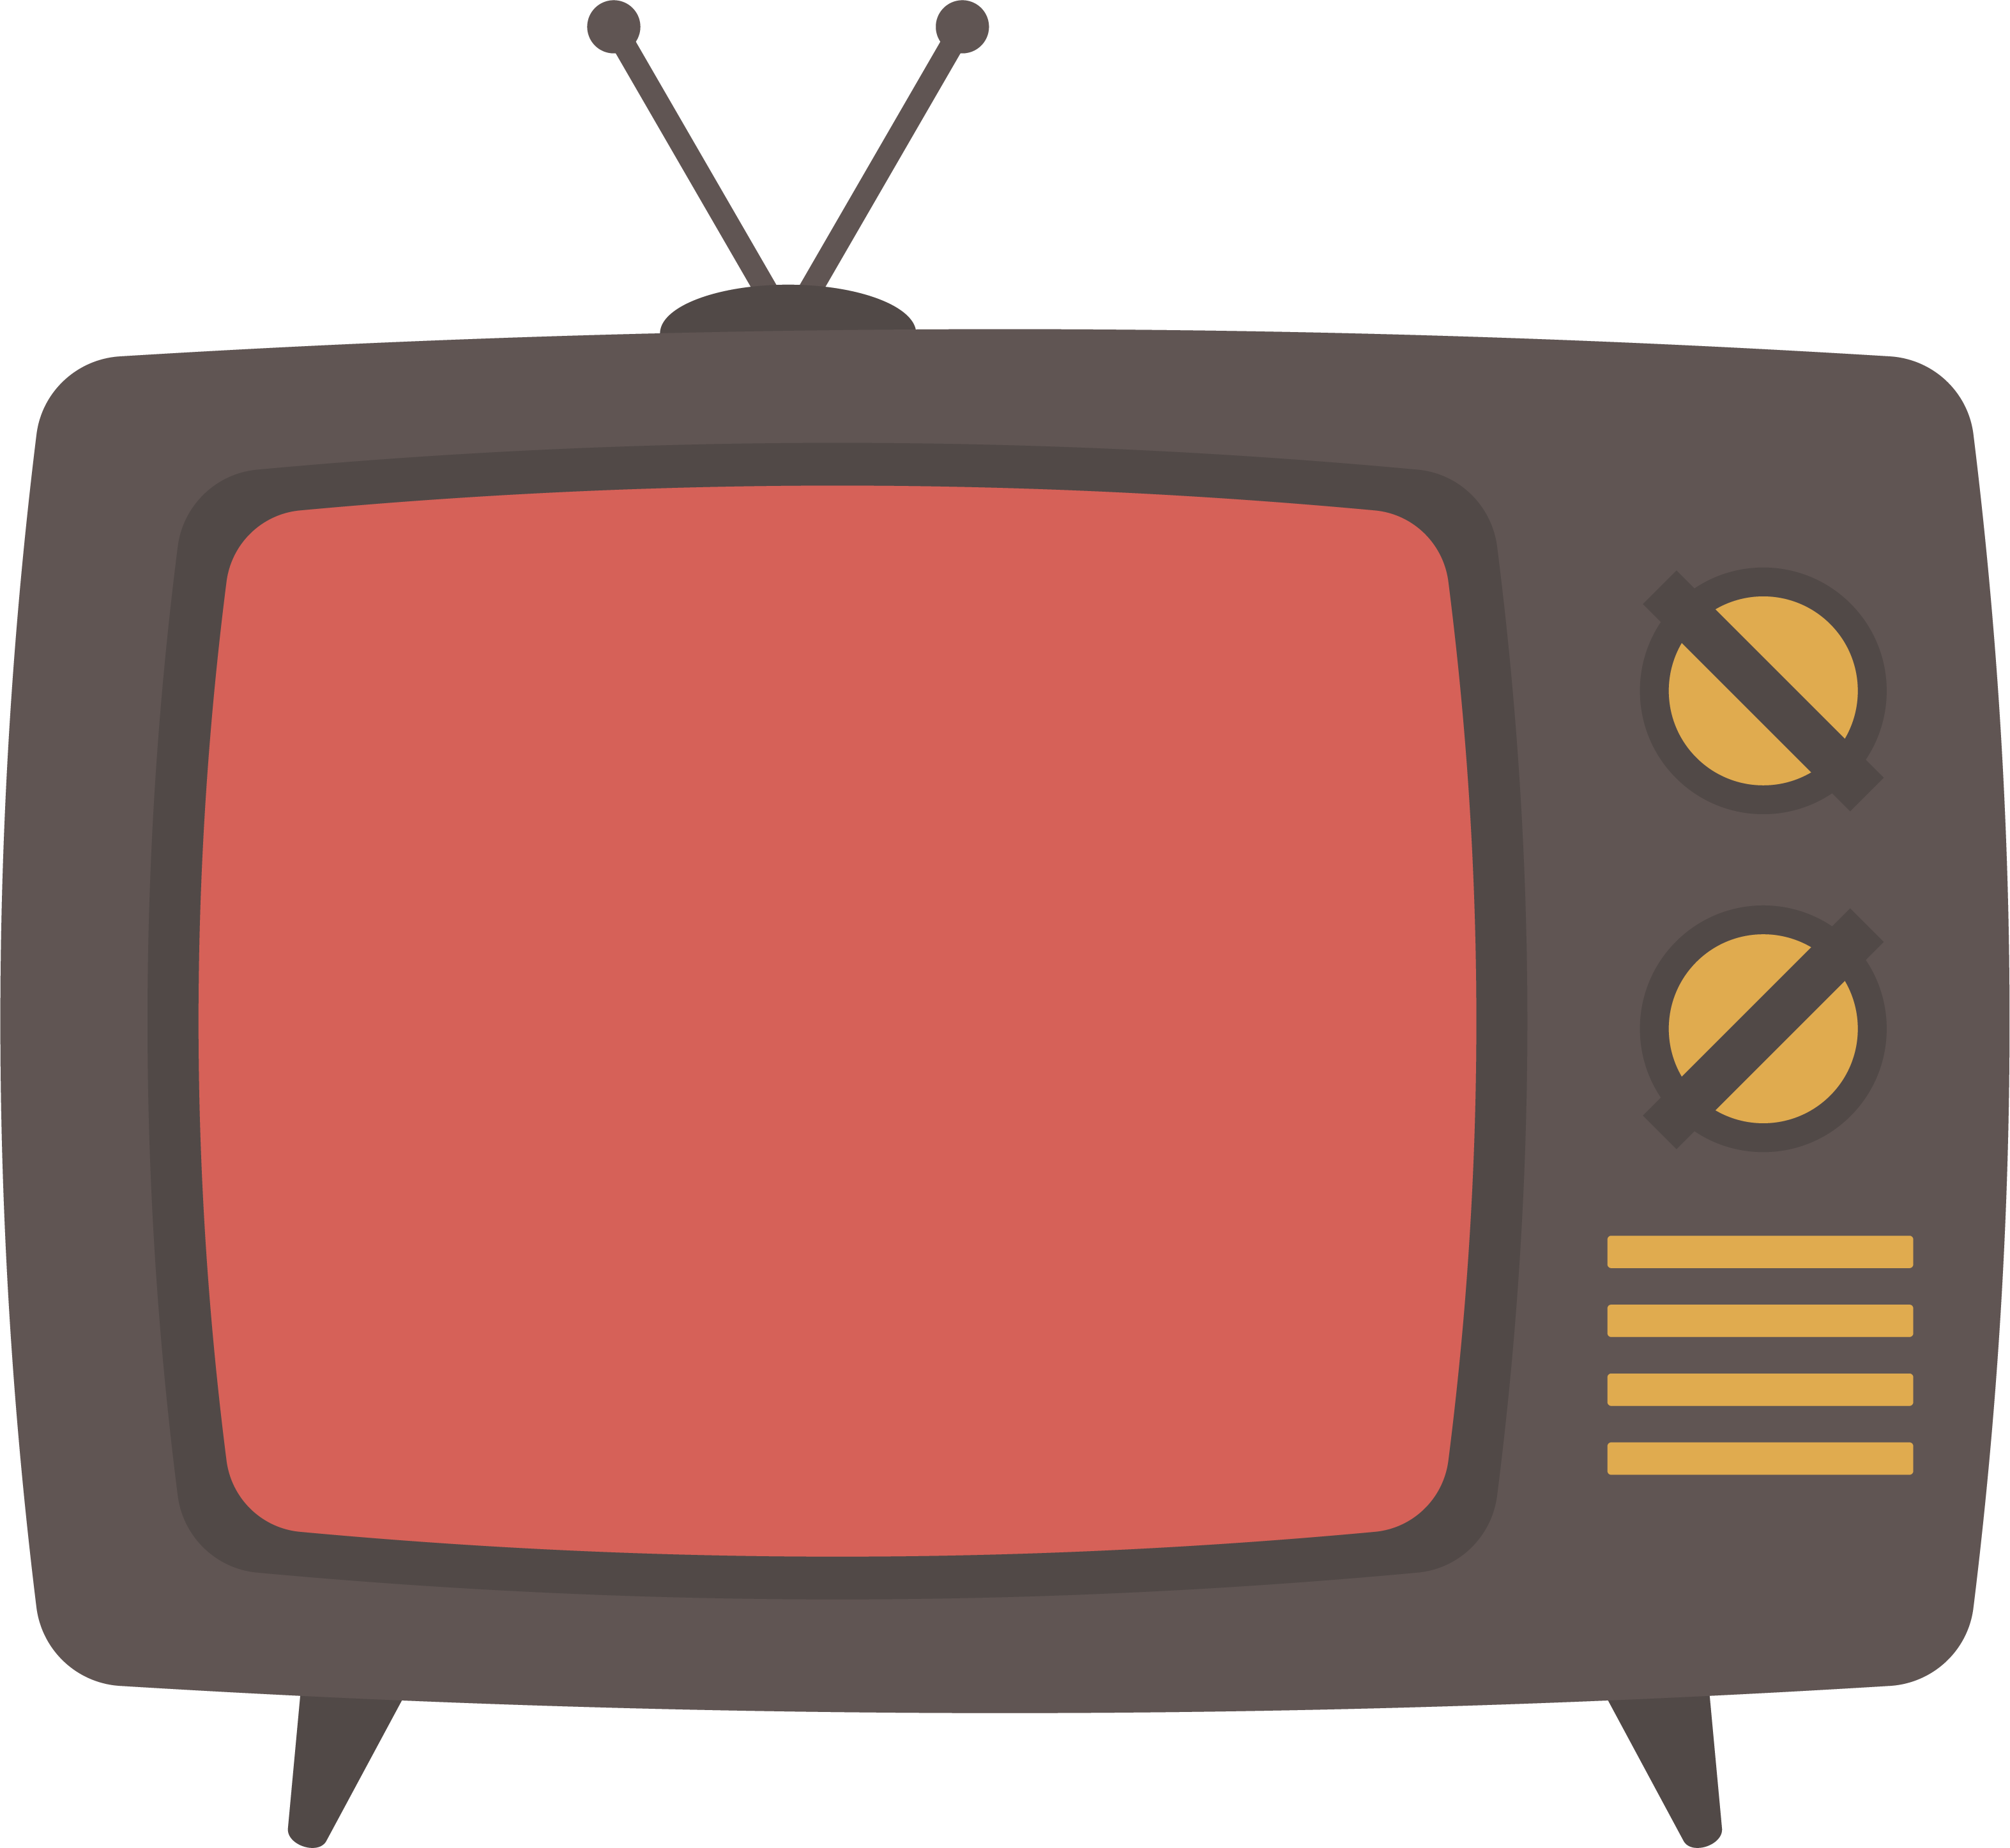 Old Television Png Image Purepng Free Transparent Cc0 - vrogue.co